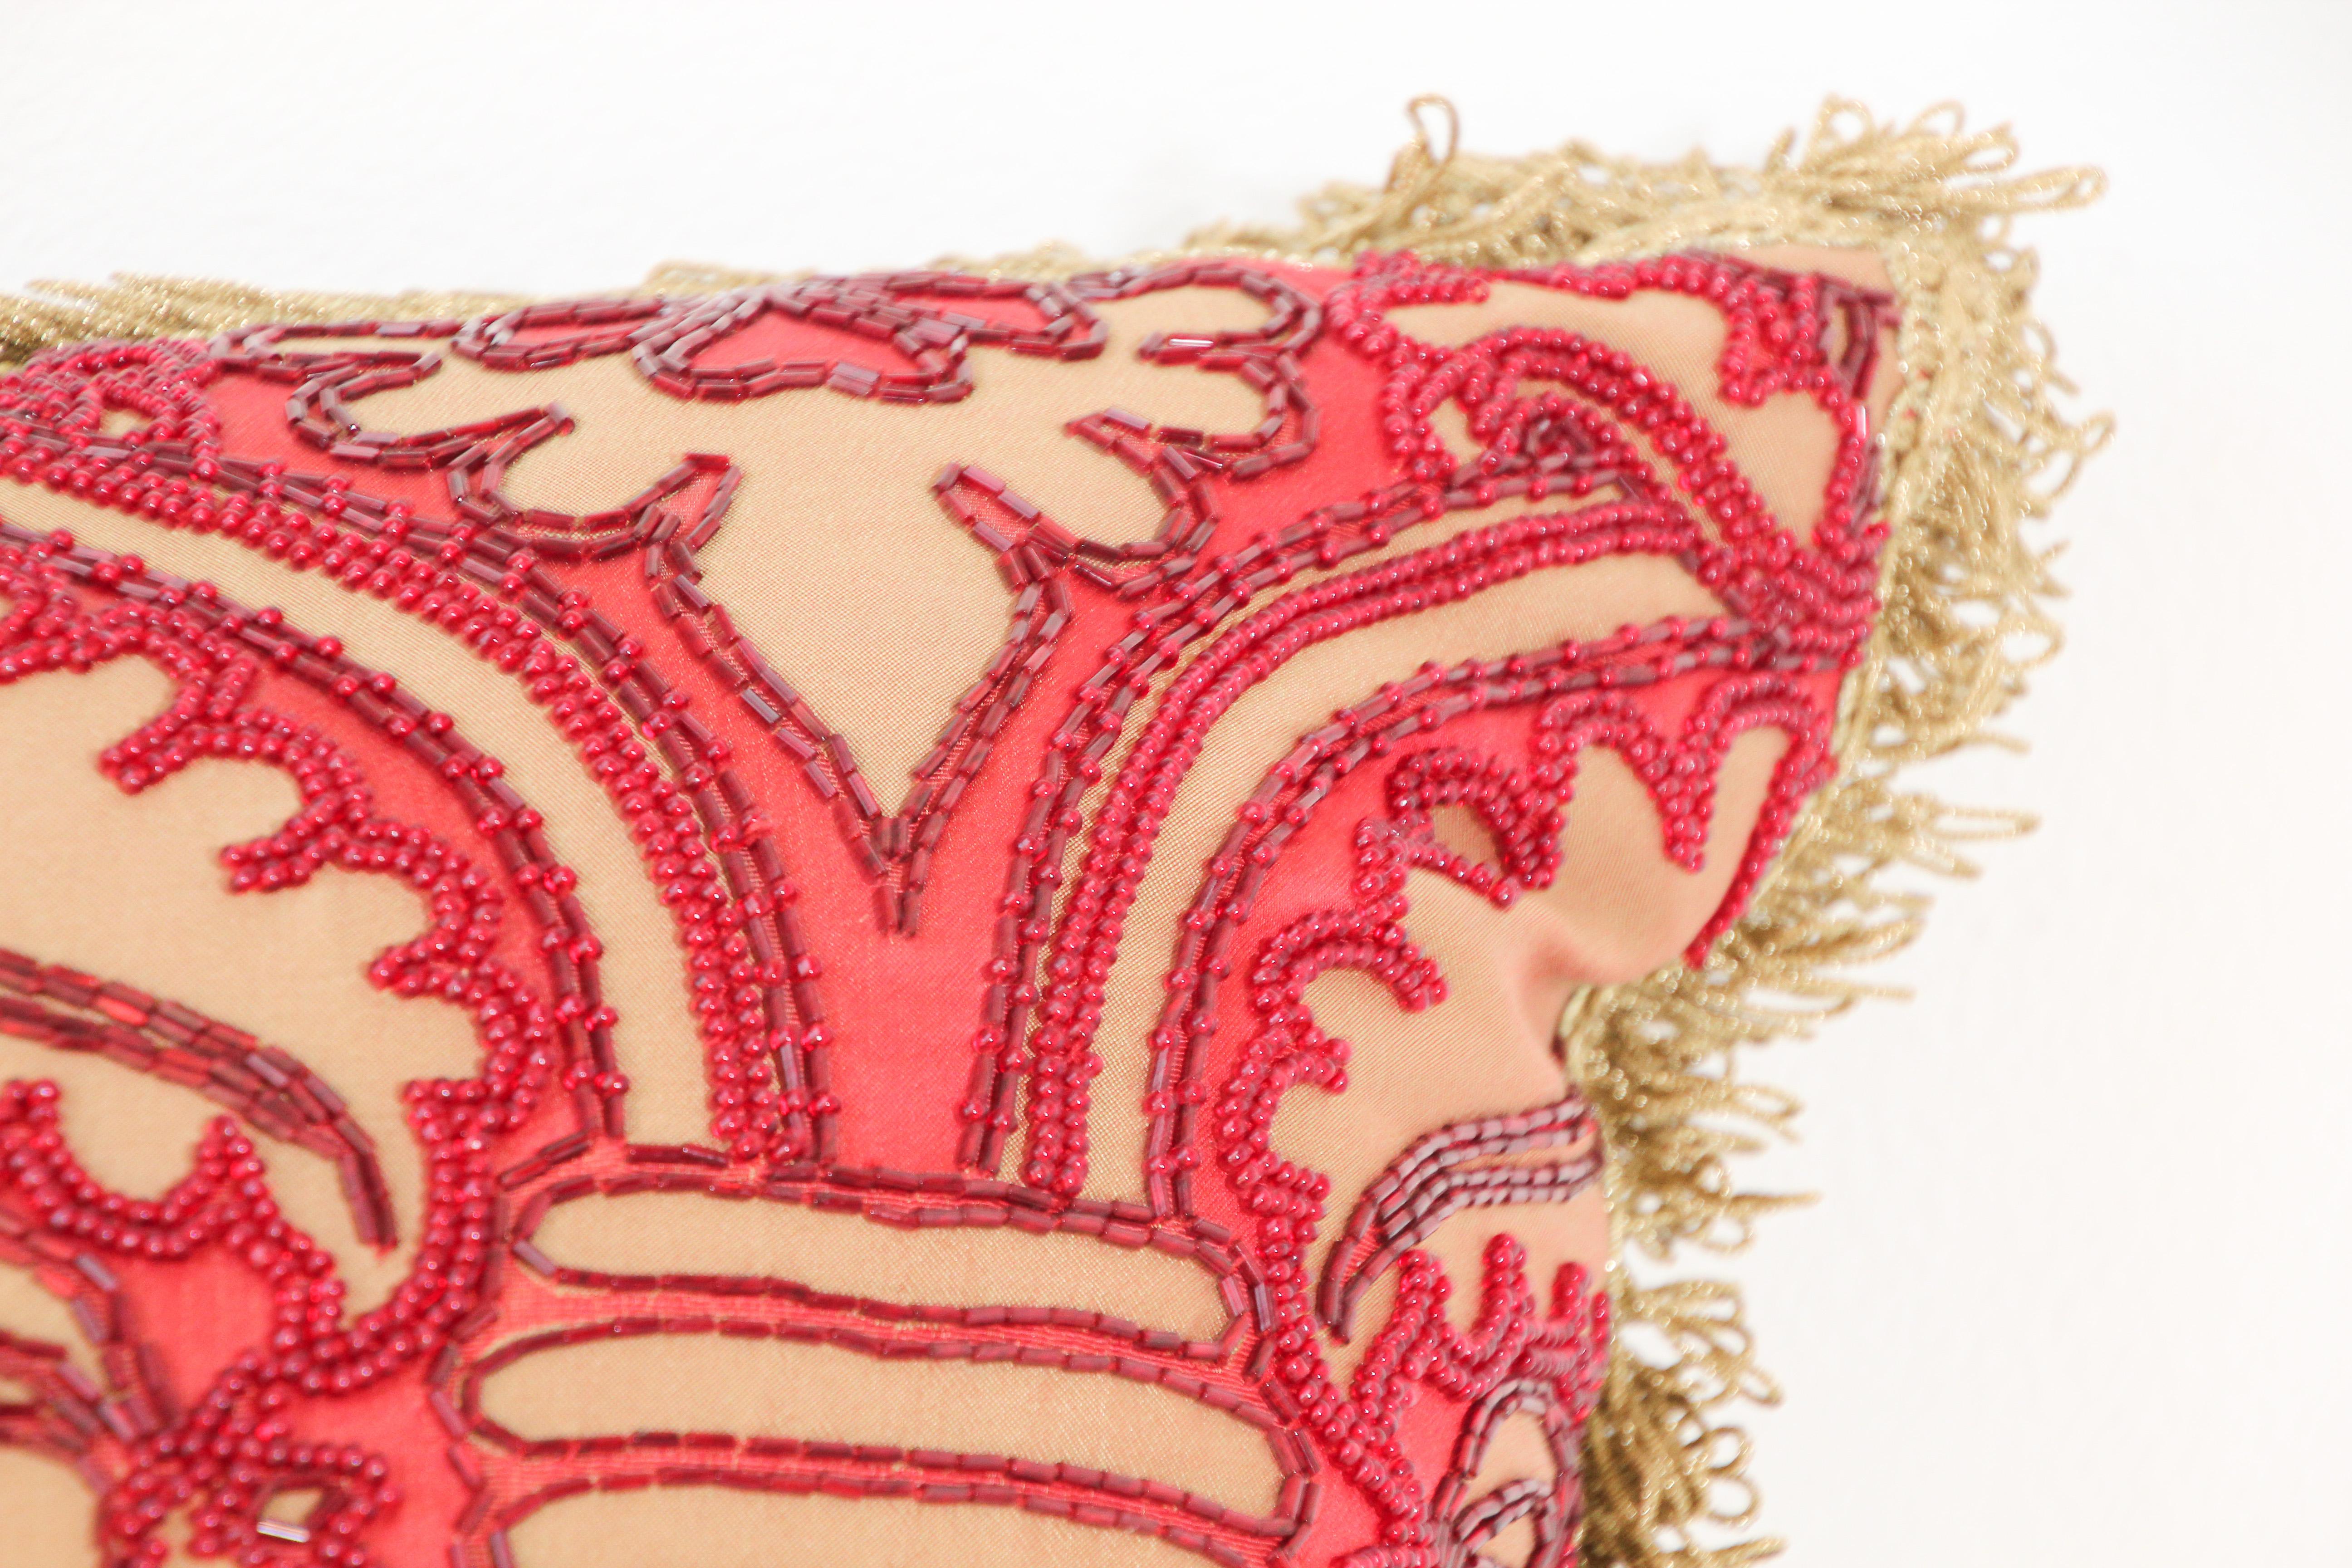 Hand-Crafted Large Silk Pillow with Metallic Red Beads